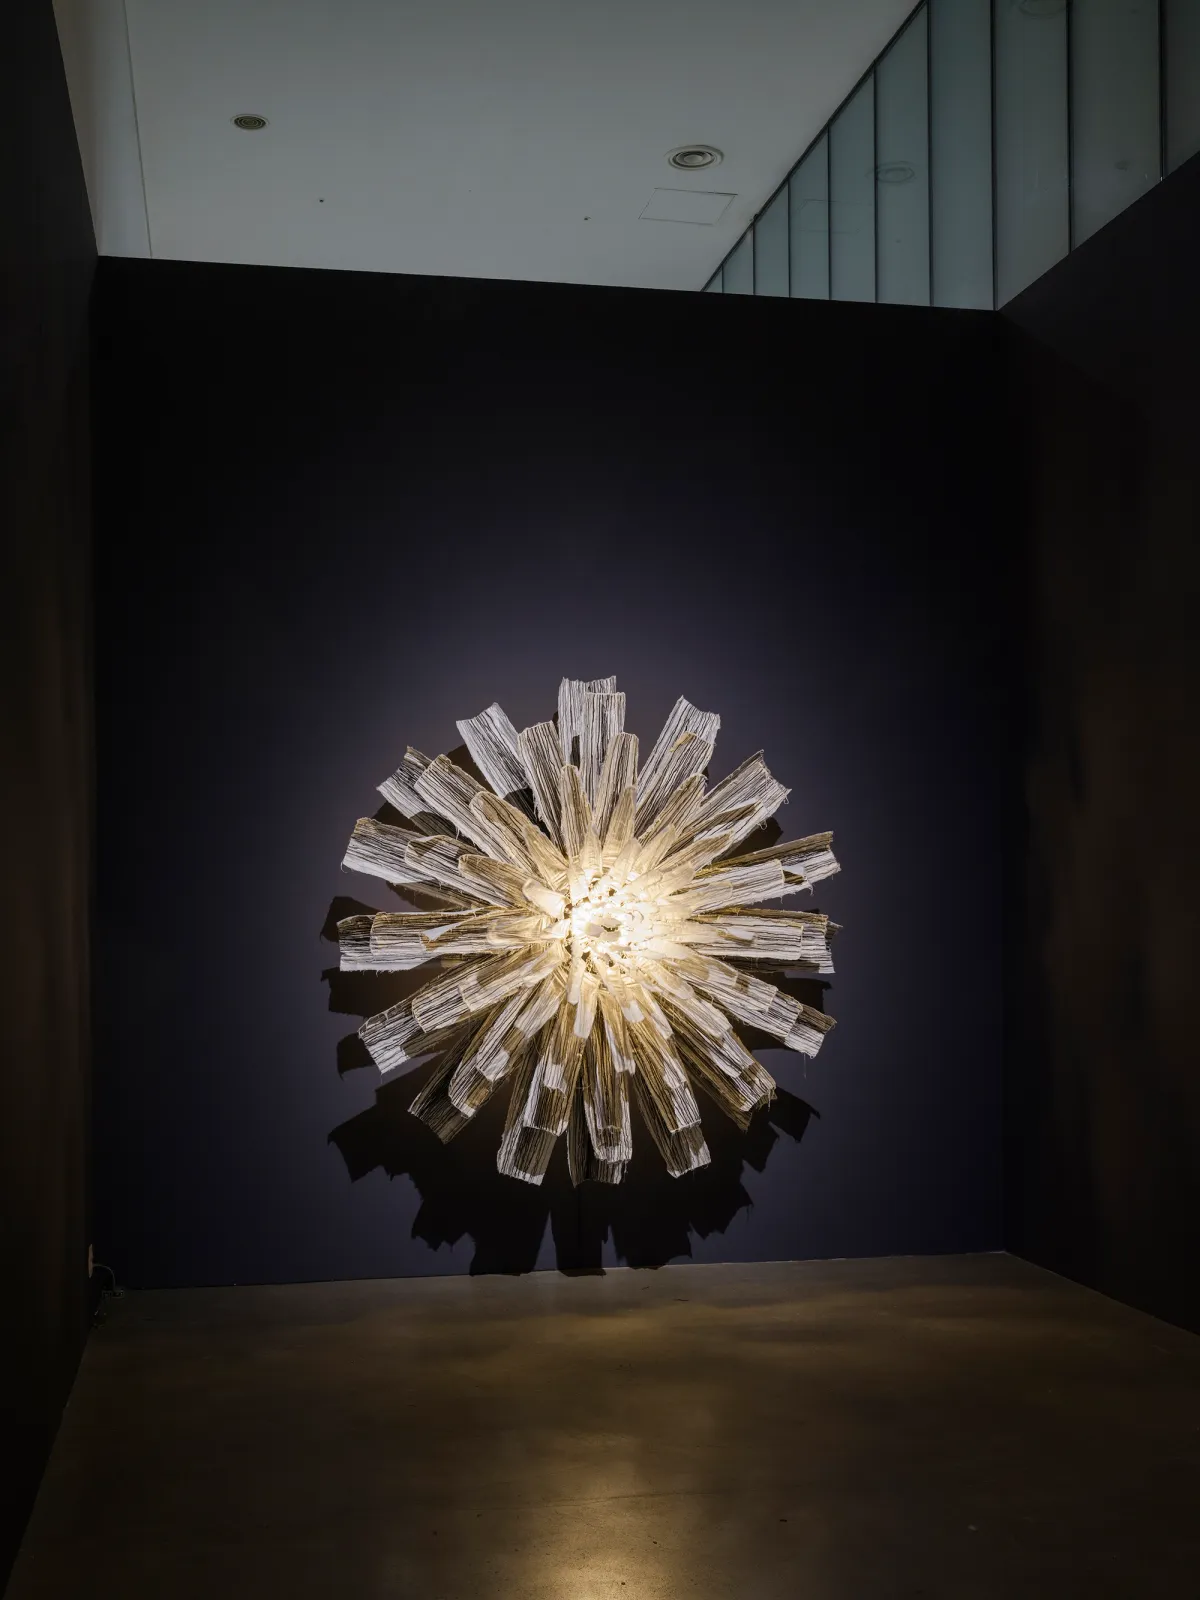 A wall-mounted art installation, reminiscent of a blooming flower, with a bright light at the center against a black wall.